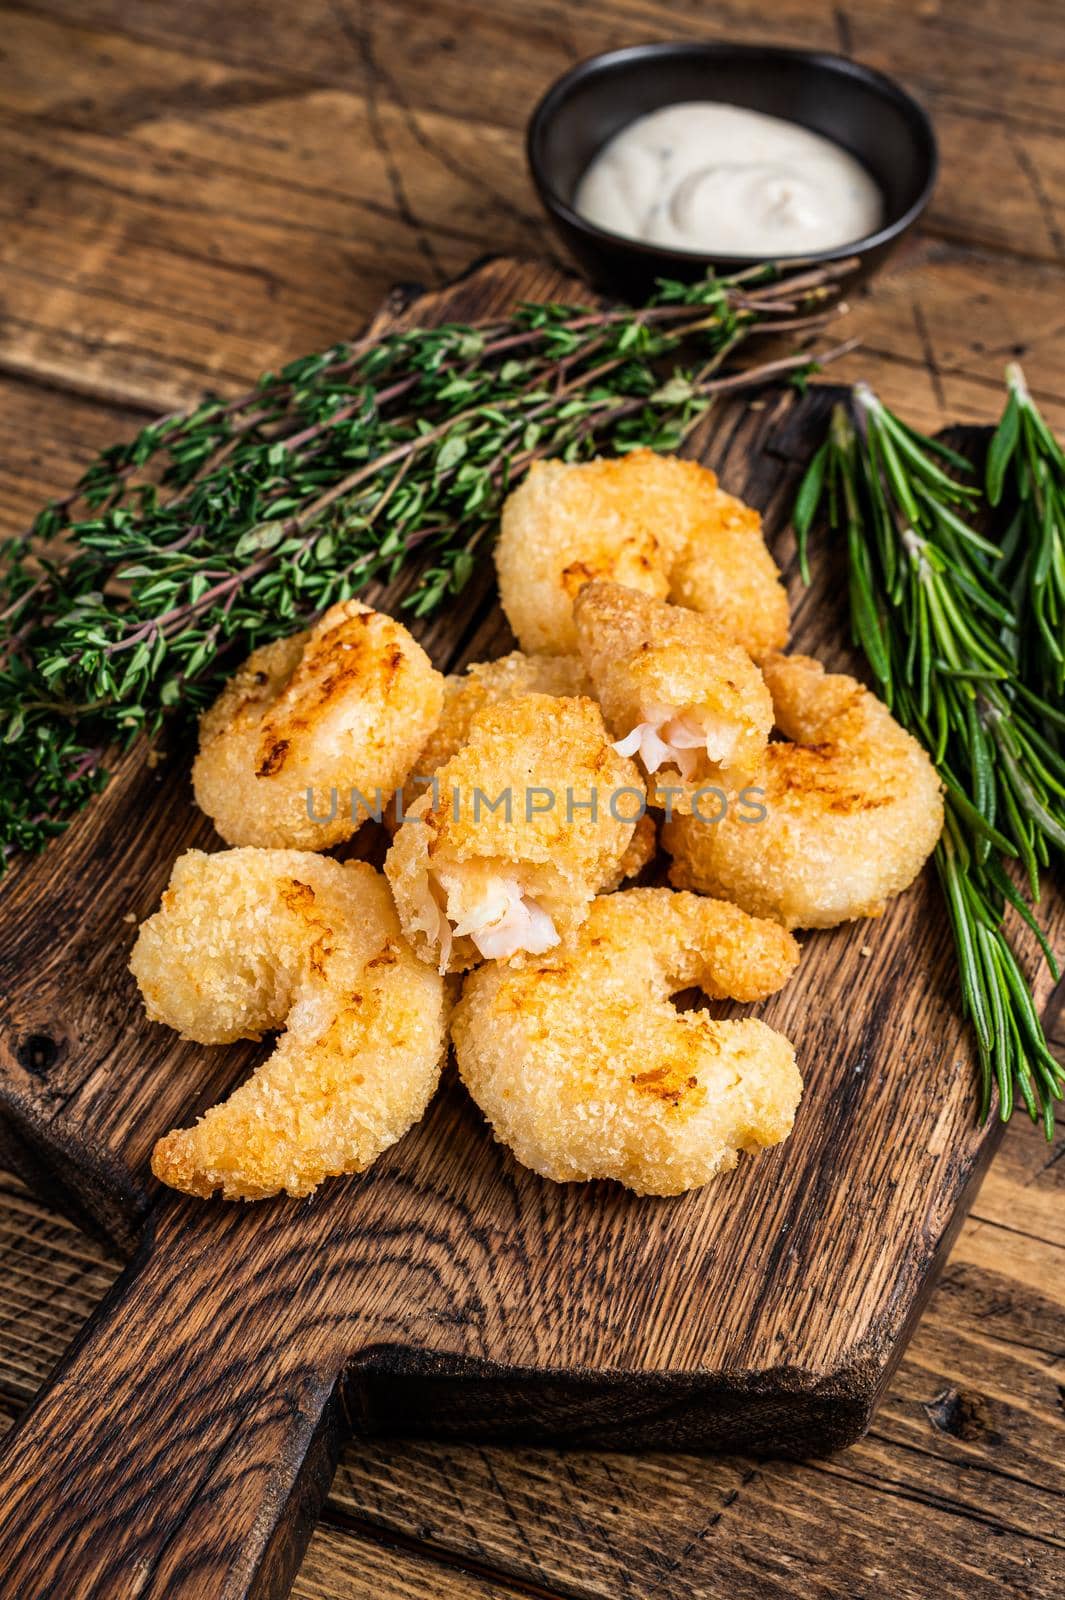 Fried Crispy Shrimps Prawns on a wooden board with sauce. wooden background. Top view.